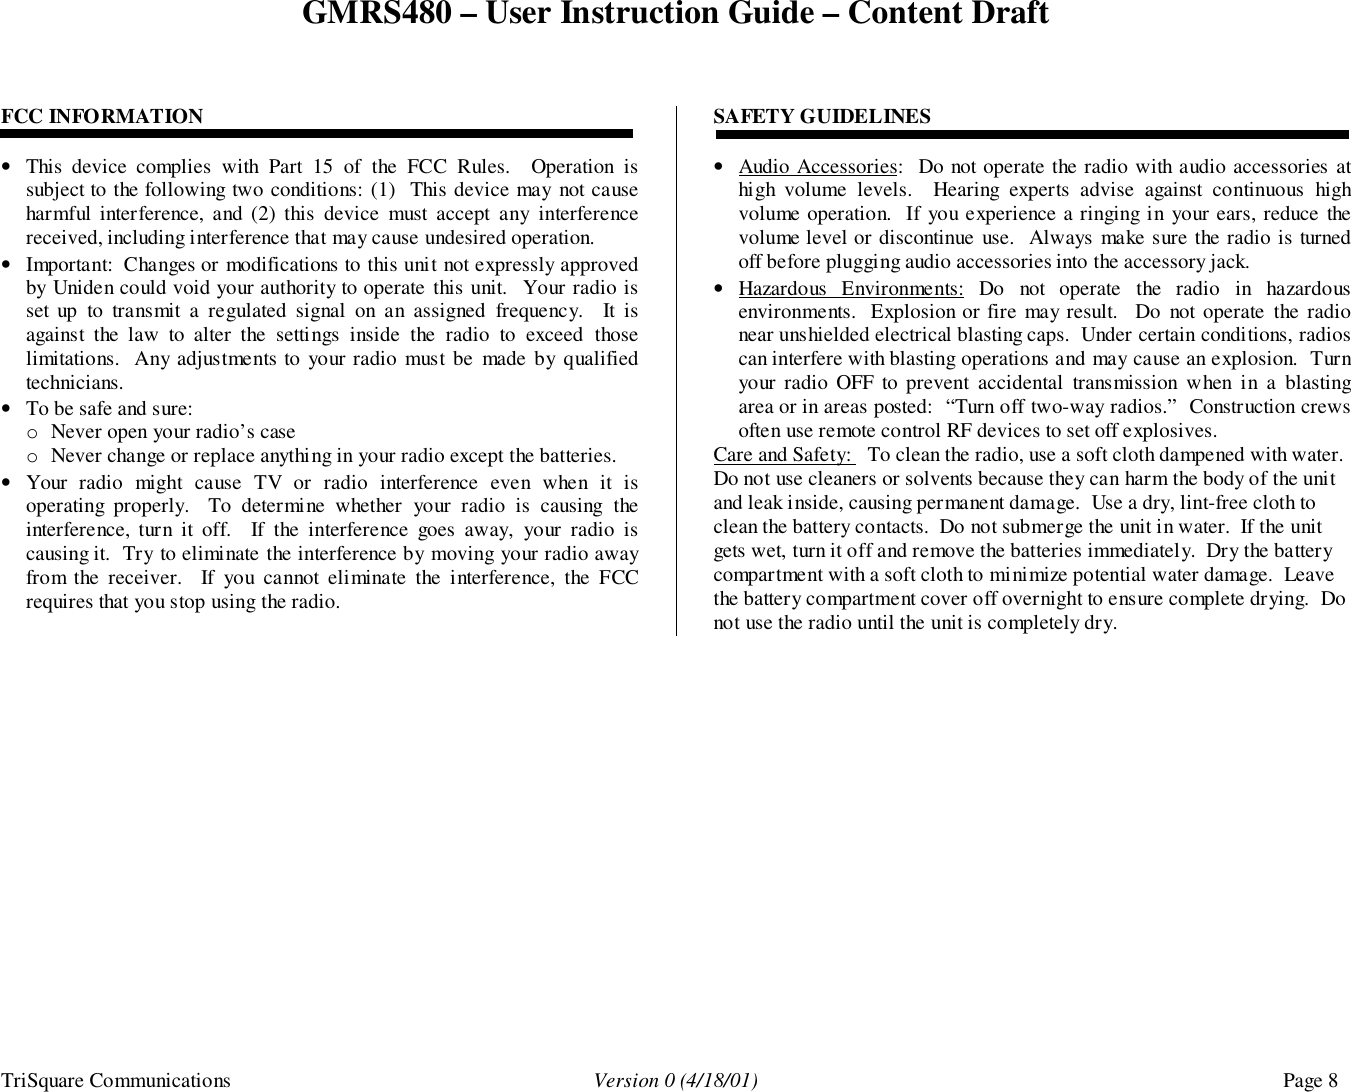 GMRS480 – User Instruction Guide – Content DraftTriSquare Communications Version 0 (4/18/01) Page 8FCC INFORMATION• This device complies with Part 15 of the FCC Rules.  Operation issubject to the following two conditions: (1)  This device may not causeharmful interference, and (2) this device must accept any interferencereceived, including interference that may cause undesired operation.• Important:  Changes or modifications to this unit not expressly approvedby Uniden could void your authority to operate this unit.  Your radio isset up to transmit a regulated signal on an assigned frequency.  It isagainst the law to alter the settings inside the radio to exceed thoselimitations.  Any adjustments to your radio must be made by qualifiedtechnicians.• To be safe and sure:o Never open your radio’s caseo Never change or replace anything in your radio except the batteries.• Your radio might cause TV or radio interference even when it isoperating properly.  To determine whether your radio is causing theinterference, turn it off.  If the interference goes away, your radio iscausing it.  Try to eliminate the interference by moving your radio awayfrom the receiver.  If you cannot eliminate the interference, the FCCrequires that you stop using the radio.SAFETY GUIDELINES• Audio Accessories:  Do not operate the radio with audio accessories athigh volume levels.  Hearing experts advise against continuous highvolume operation.  If you experience a ringing in your ears, reduce thevolume level or discontinue use.  Always make sure the radio is turnedoff before plugging audio accessories into the accessory jack.• Hazardous Environments: Do not operate the radio in hazardousenvironments.  Explosion or fire may result.  Do not operate the radionear unshielded electrical blasting caps.  Under certain conditions, radioscan interfere with blasting operations and may cause an explosion.  Turnyour radio OFF to prevent accidental transmission when in a blastingarea or in areas posted:  “Turn off two-way radios.”  Construction crewsoften use remote control RF devices to set off explosives.Care and Safety:   To clean the radio, use a soft cloth dampened with water.Do not use cleaners or solvents because they can harm the body of the unitand leak inside, causing permanent damage.  Use a dry, lint-free cloth toclean the battery contacts.  Do not submerge the unit in water.  If the unitgets wet, turn it off and remove the batteries immediately.  Dry the batterycompartment with a soft cloth to minimize potential water damage.  Leavethe battery compartment cover off overnight to ensure complete drying.  Donot use the radio until the unit is completely dry.